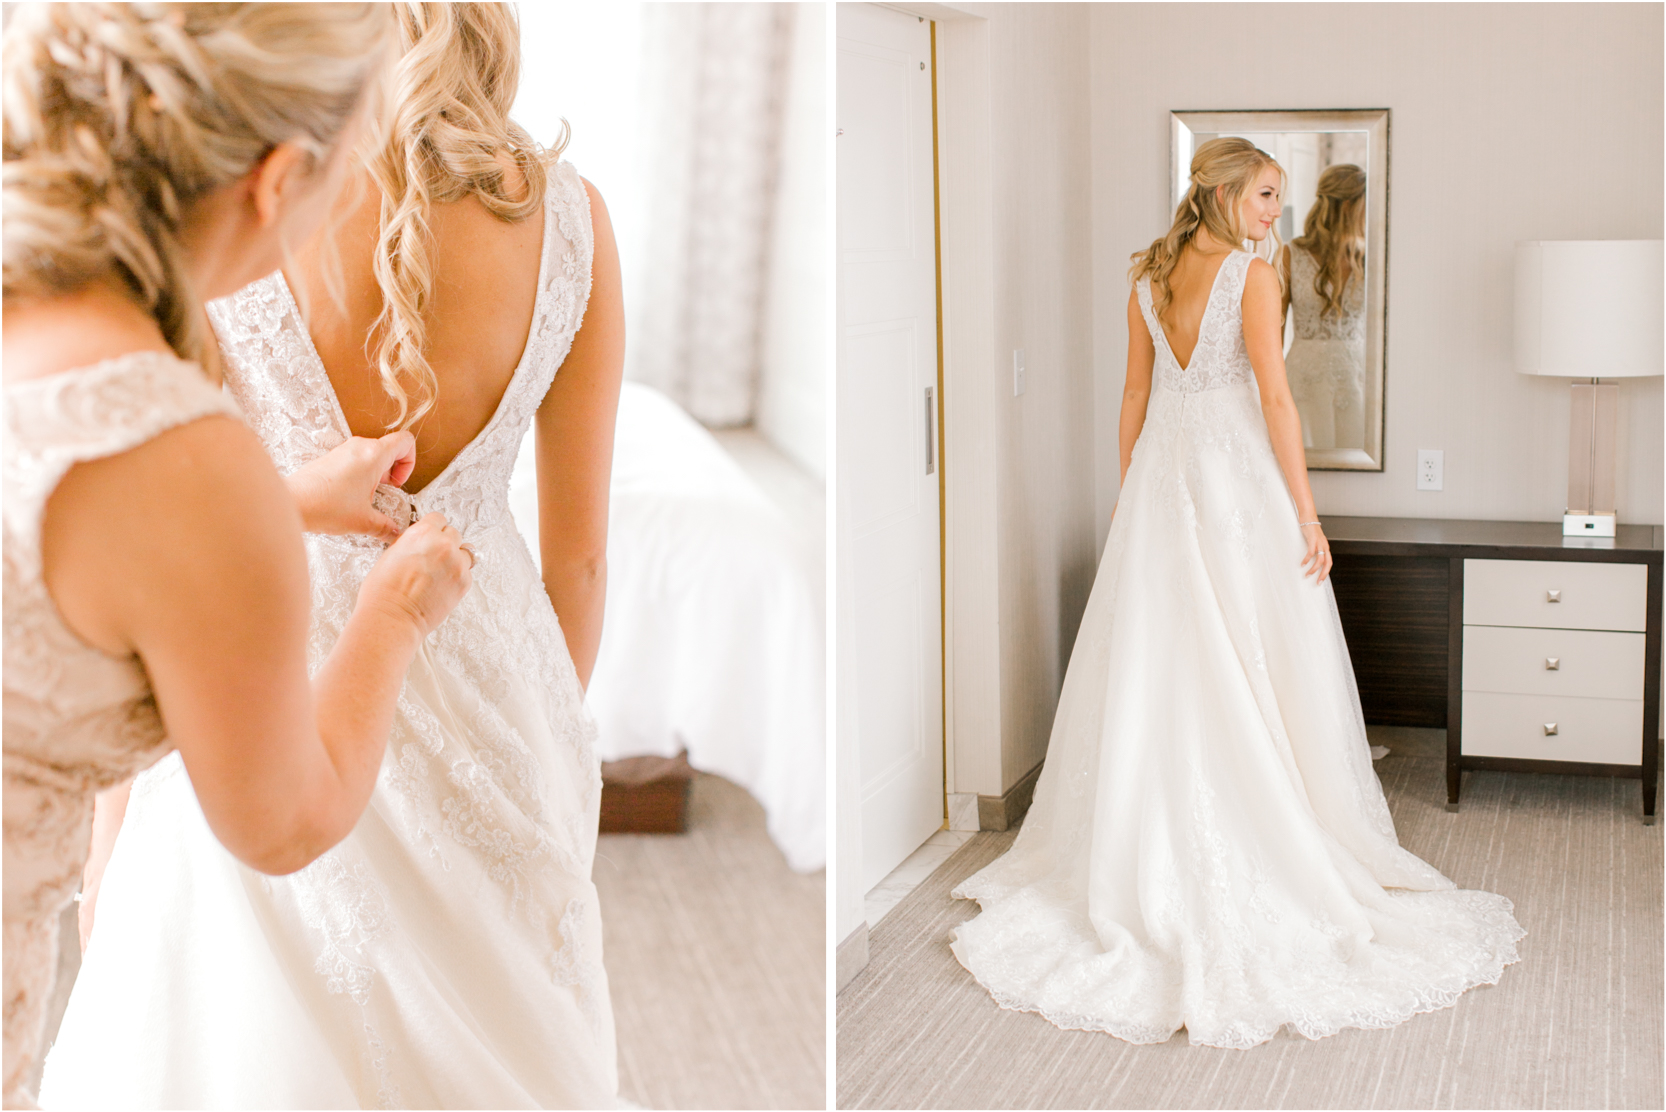 Embassy Suites Wedding Dress Getting Ready Details